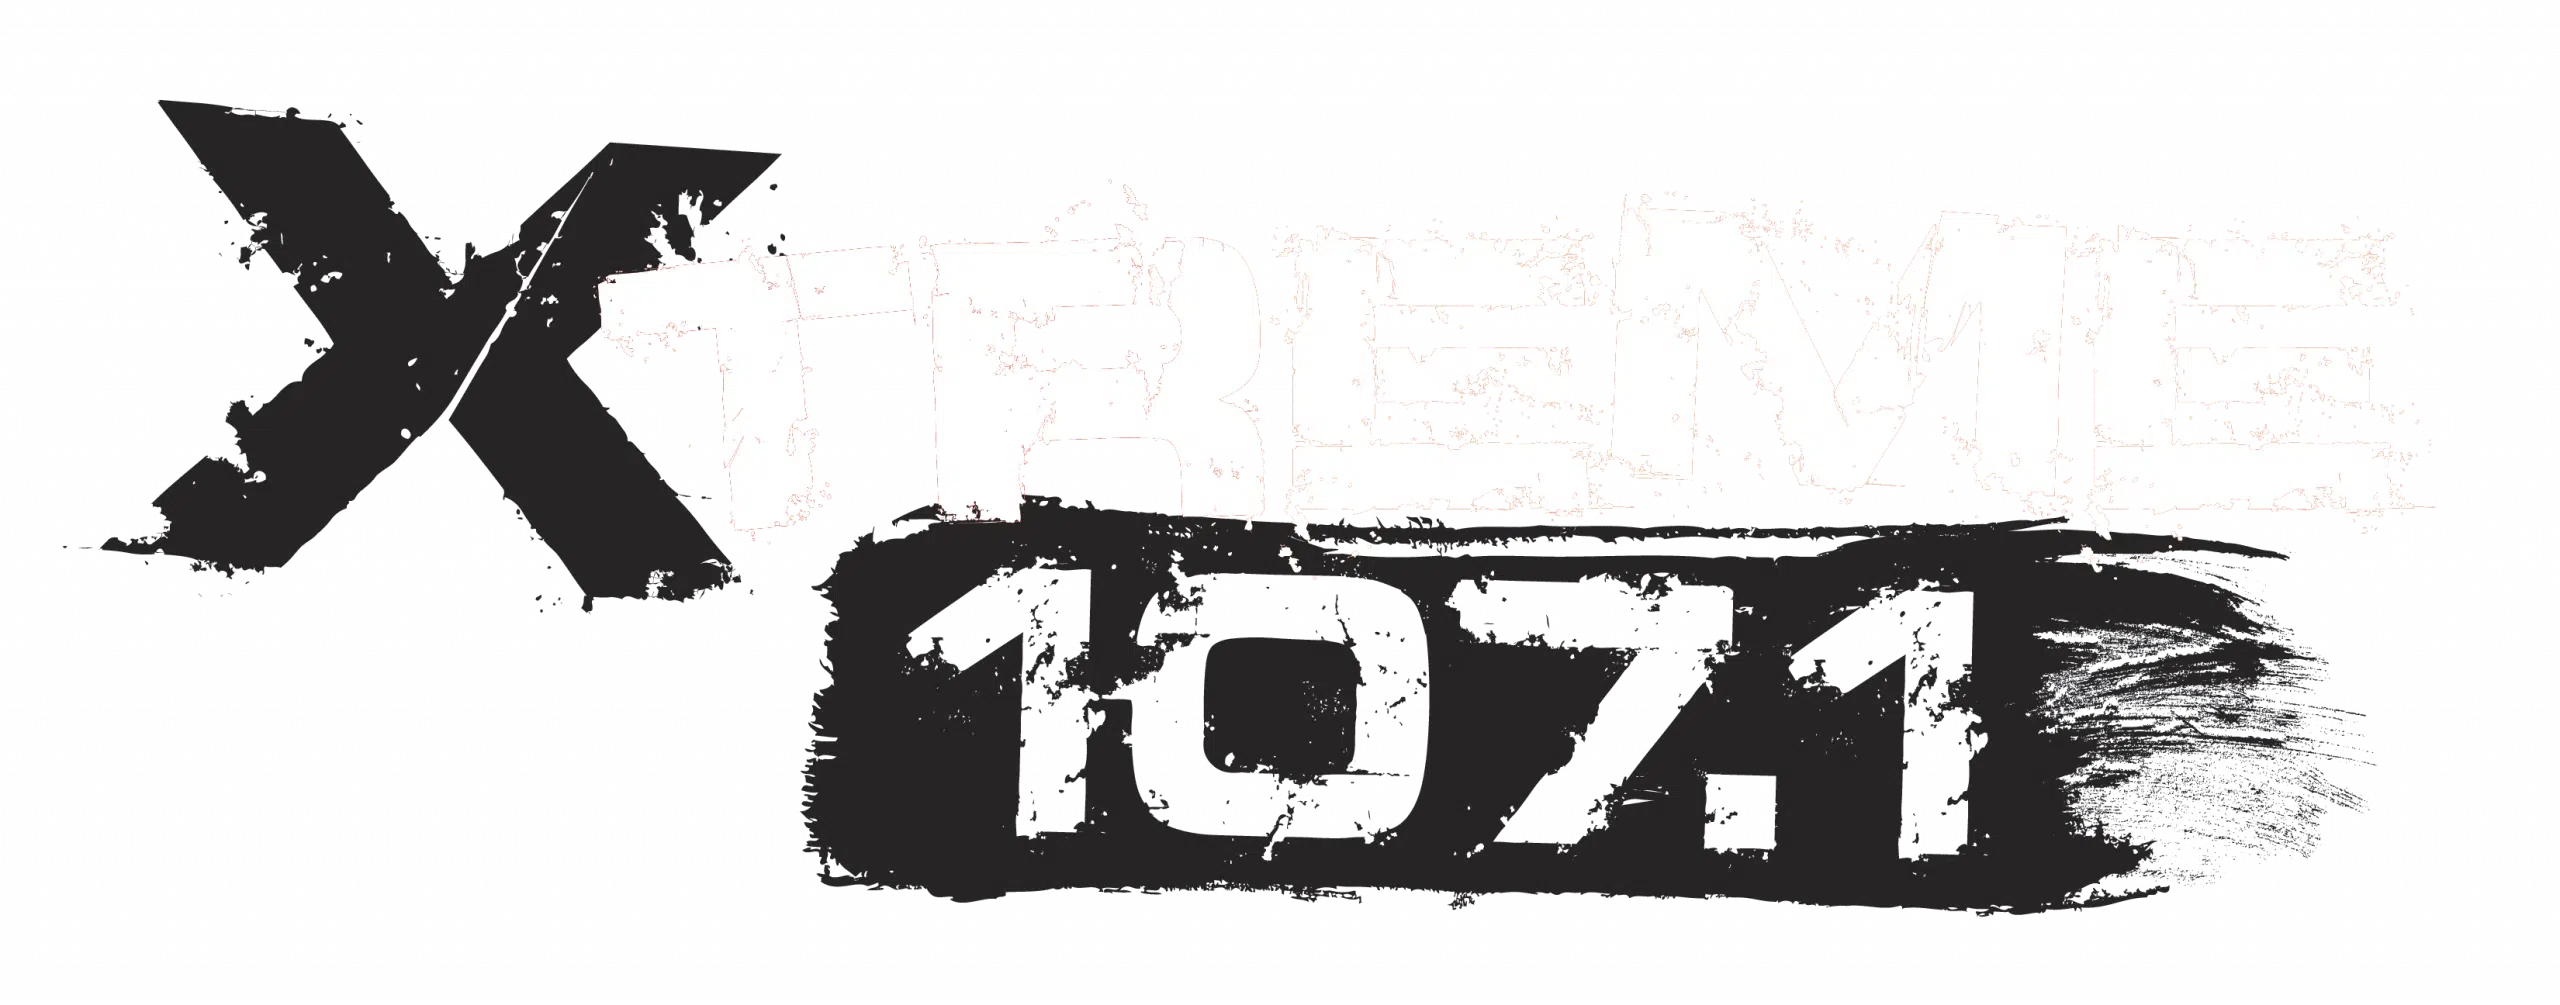 Xtreme 107.1 - Platteville, Dubuque, Galena - The Newest Music First